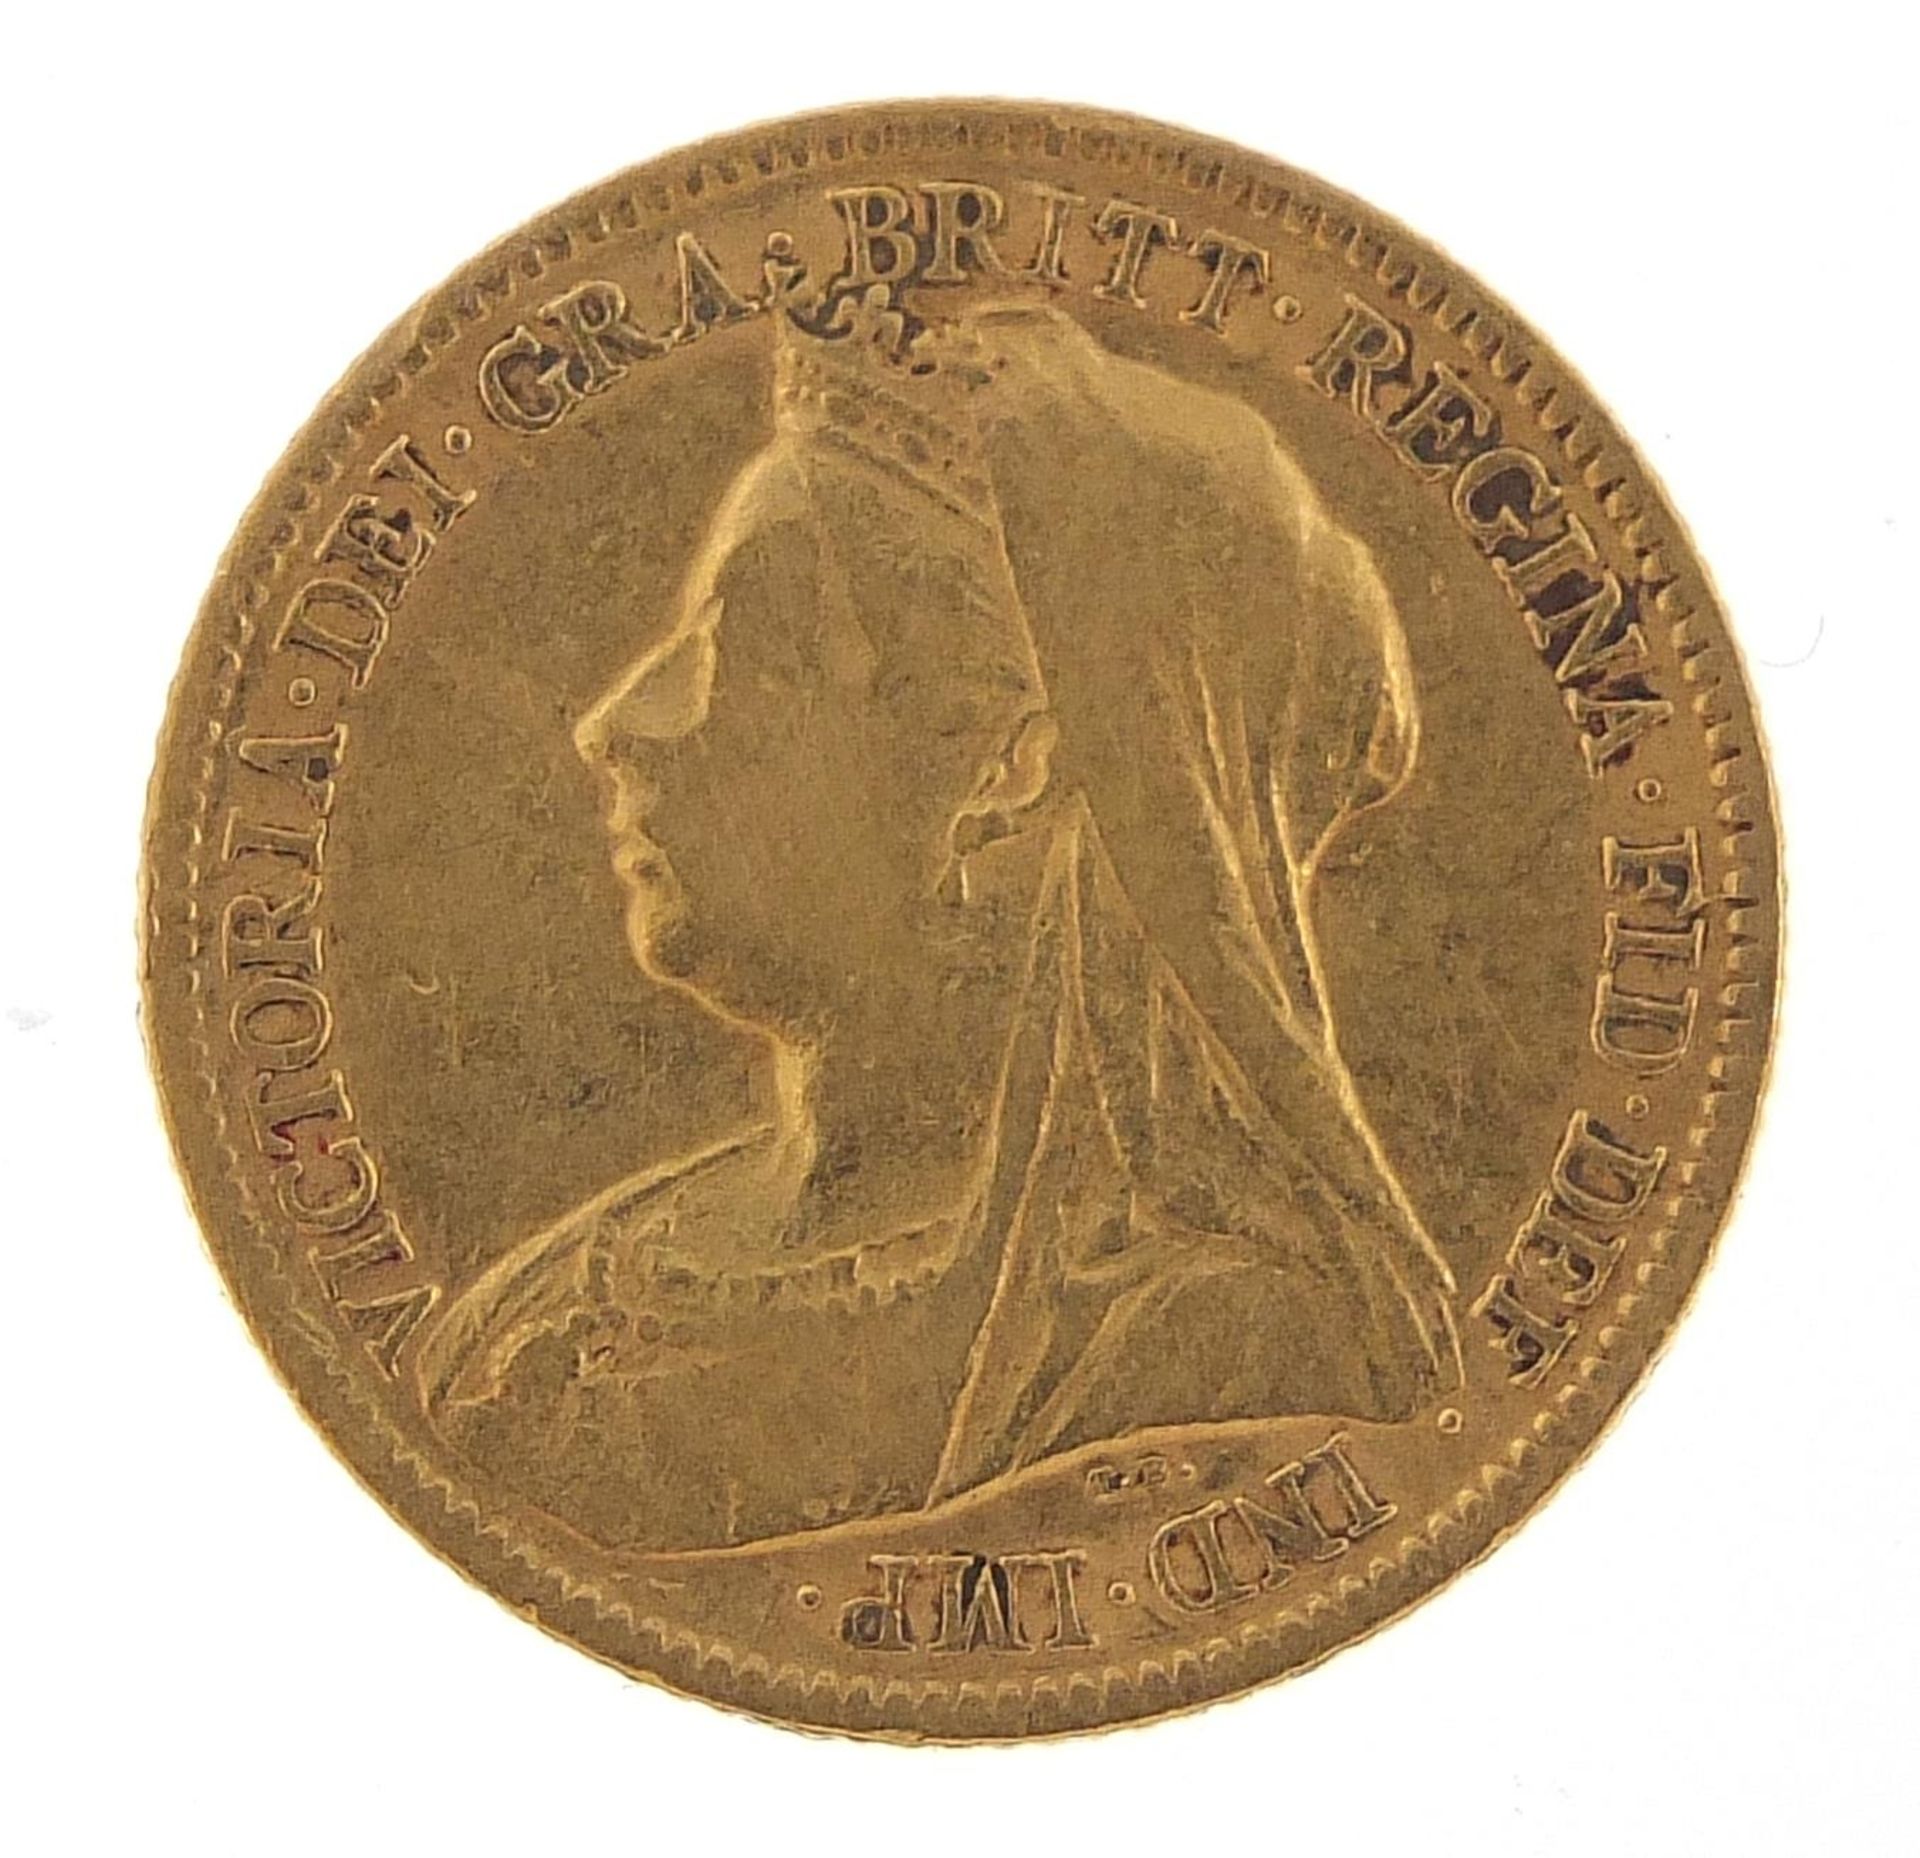 Queen Victoria 1900 gold half sovereign - this lot is sold without buyer's premium - Image 2 of 3